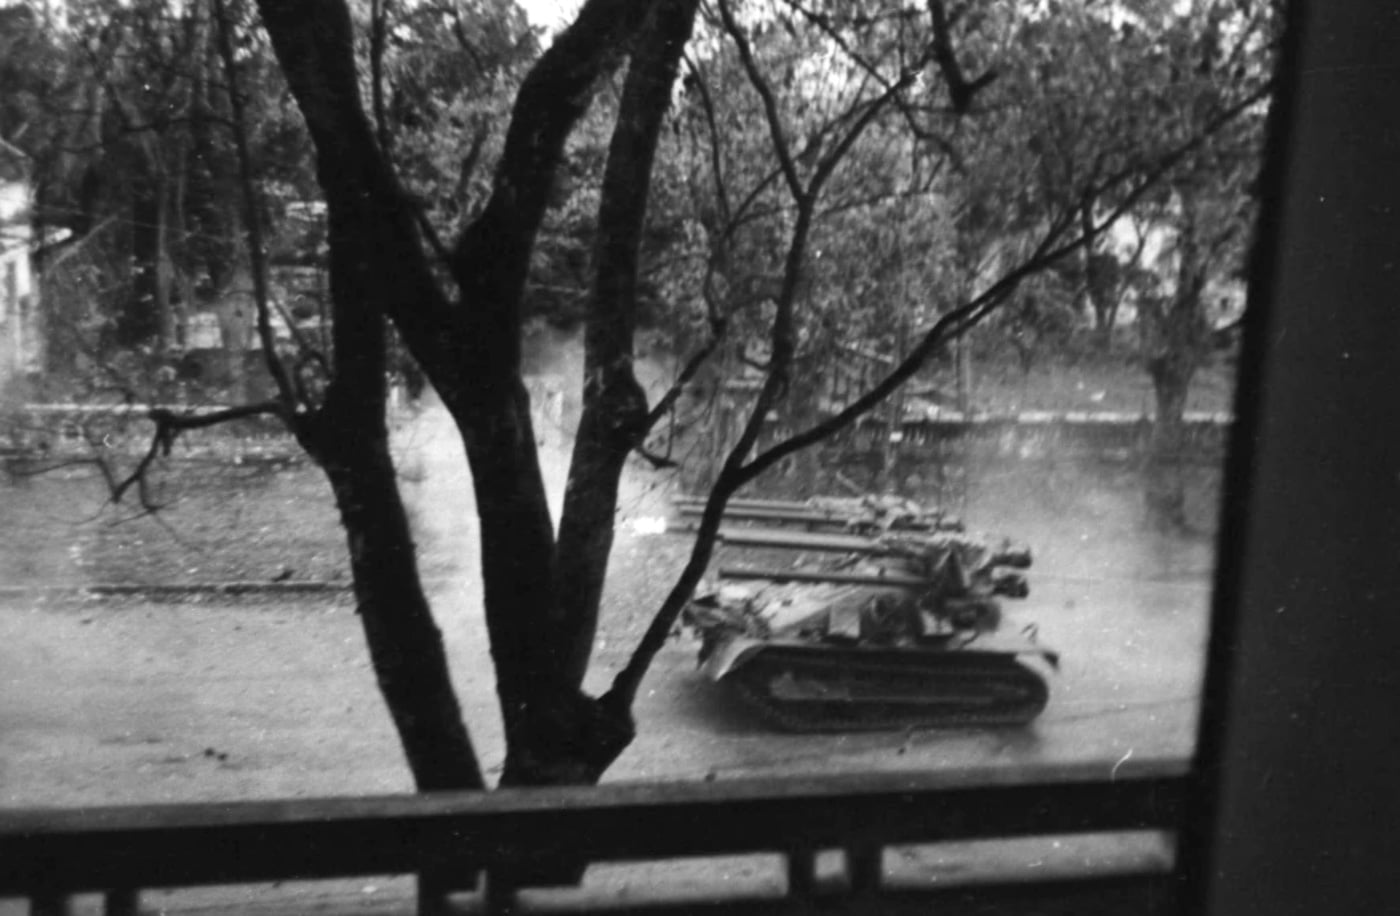 106mm recoilless rifles fired from m50 ontos in battle of hue